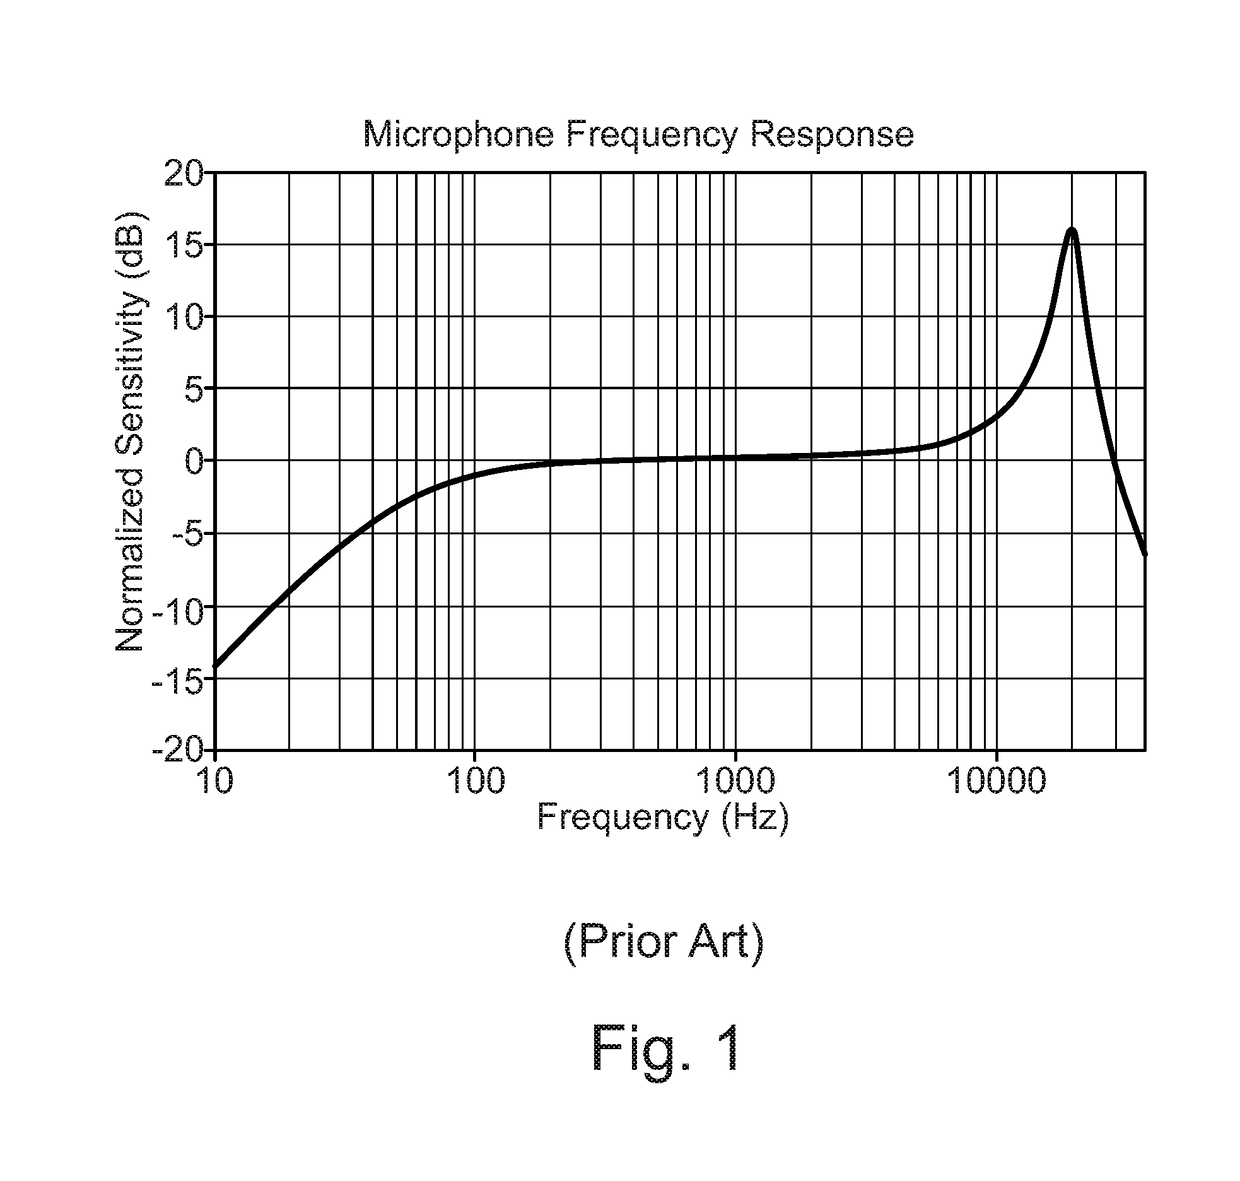 Microphone assembly with suppressed frequency response